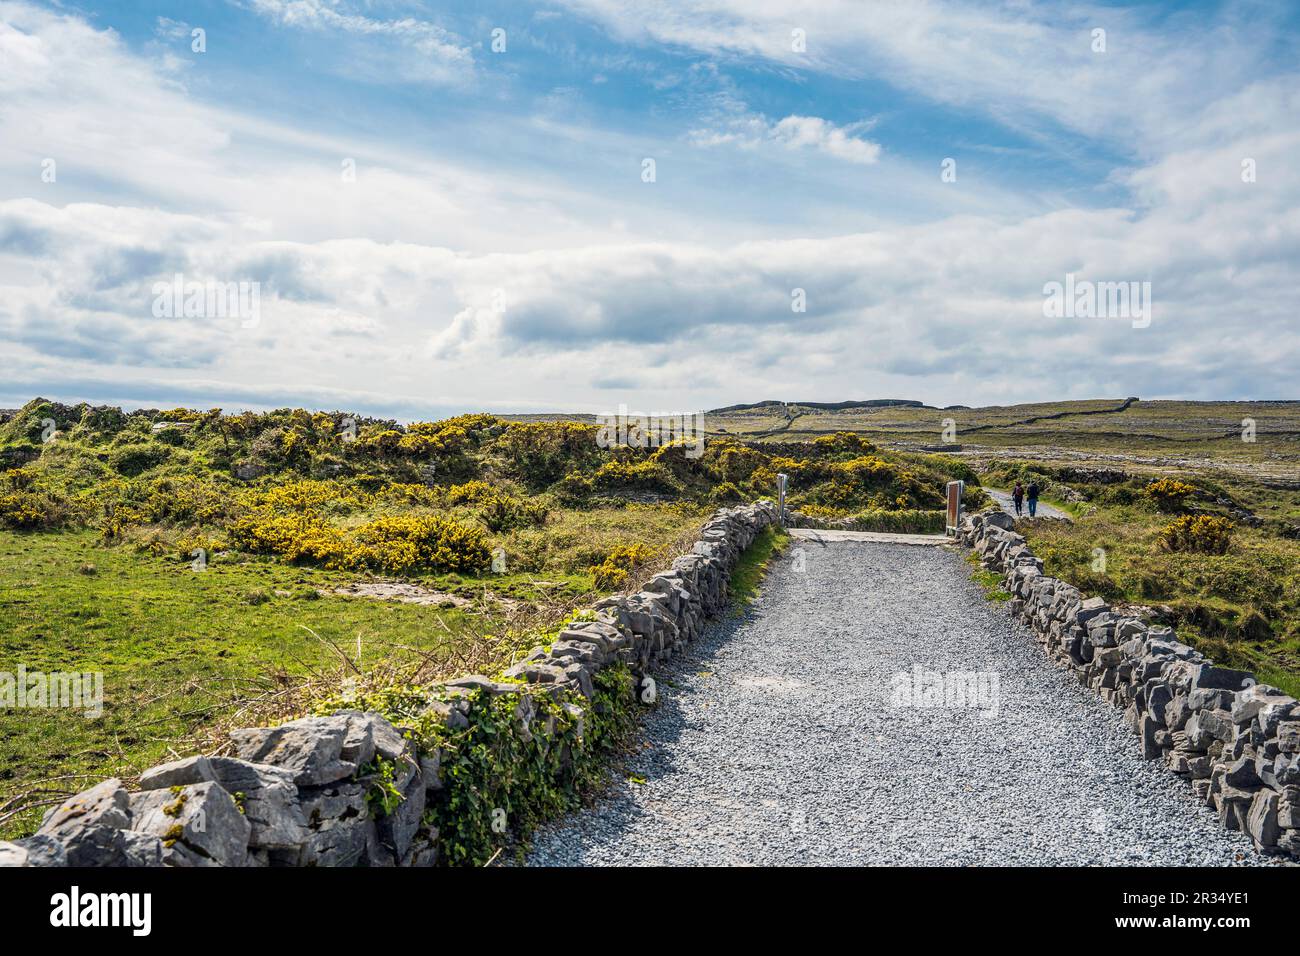 Path to Dún Aonghasa (Fort Aengus) in Inis Mór or Inishmore, the largest of the Aran Islands in Galway Bay, west Ireland. Stock Photo